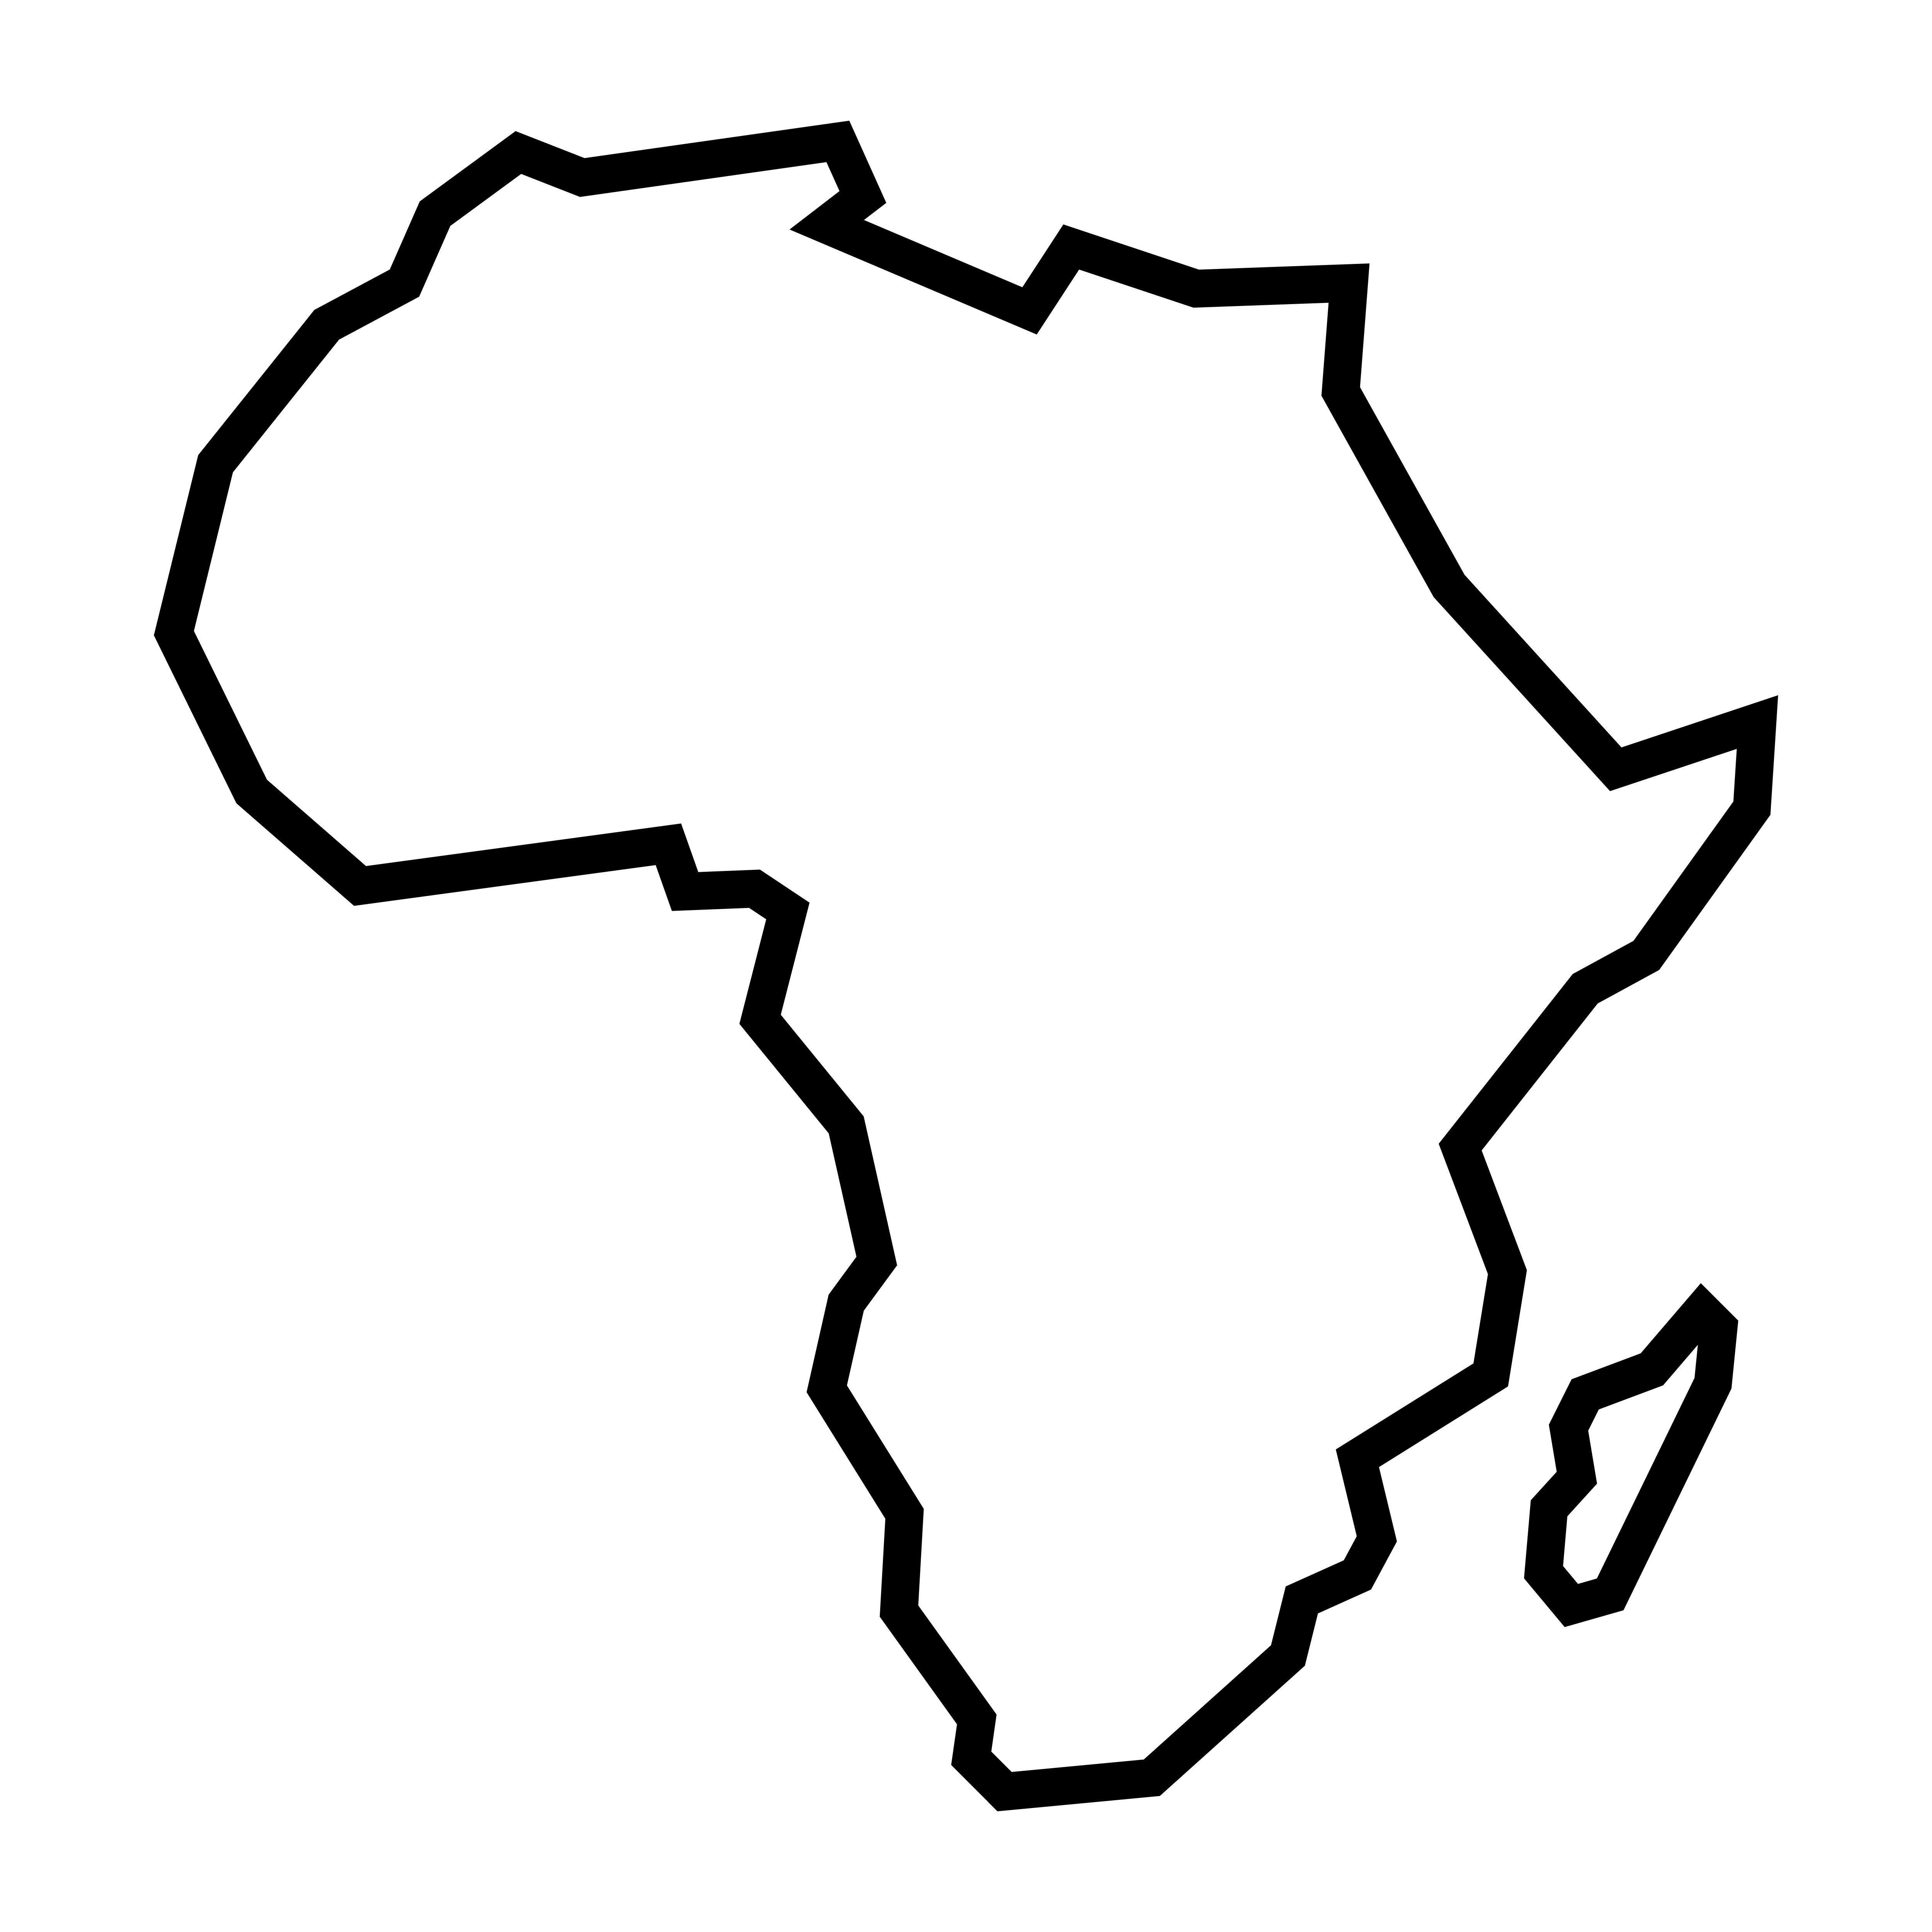 Africa Continent Outline Free Vector Art.